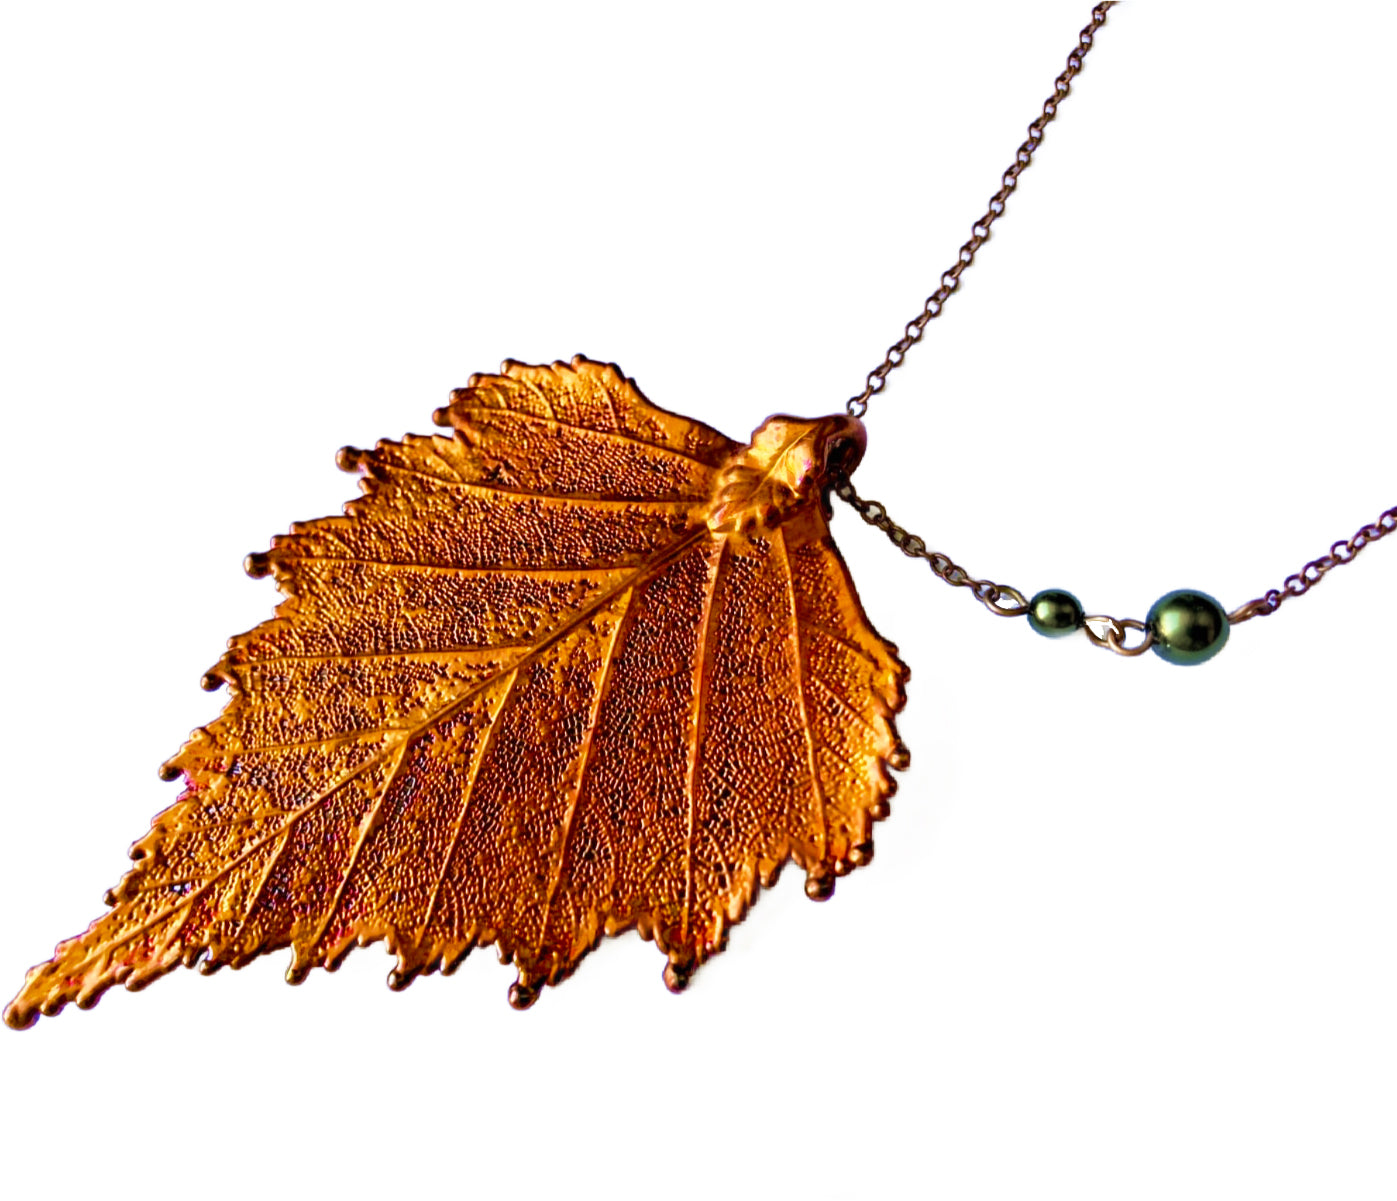 Extra Large Fallen Copper Birch Leaf Necklace  | REAL Birch Leaf Pendant | Copper Electroformed Pendant | Nature Jewelry